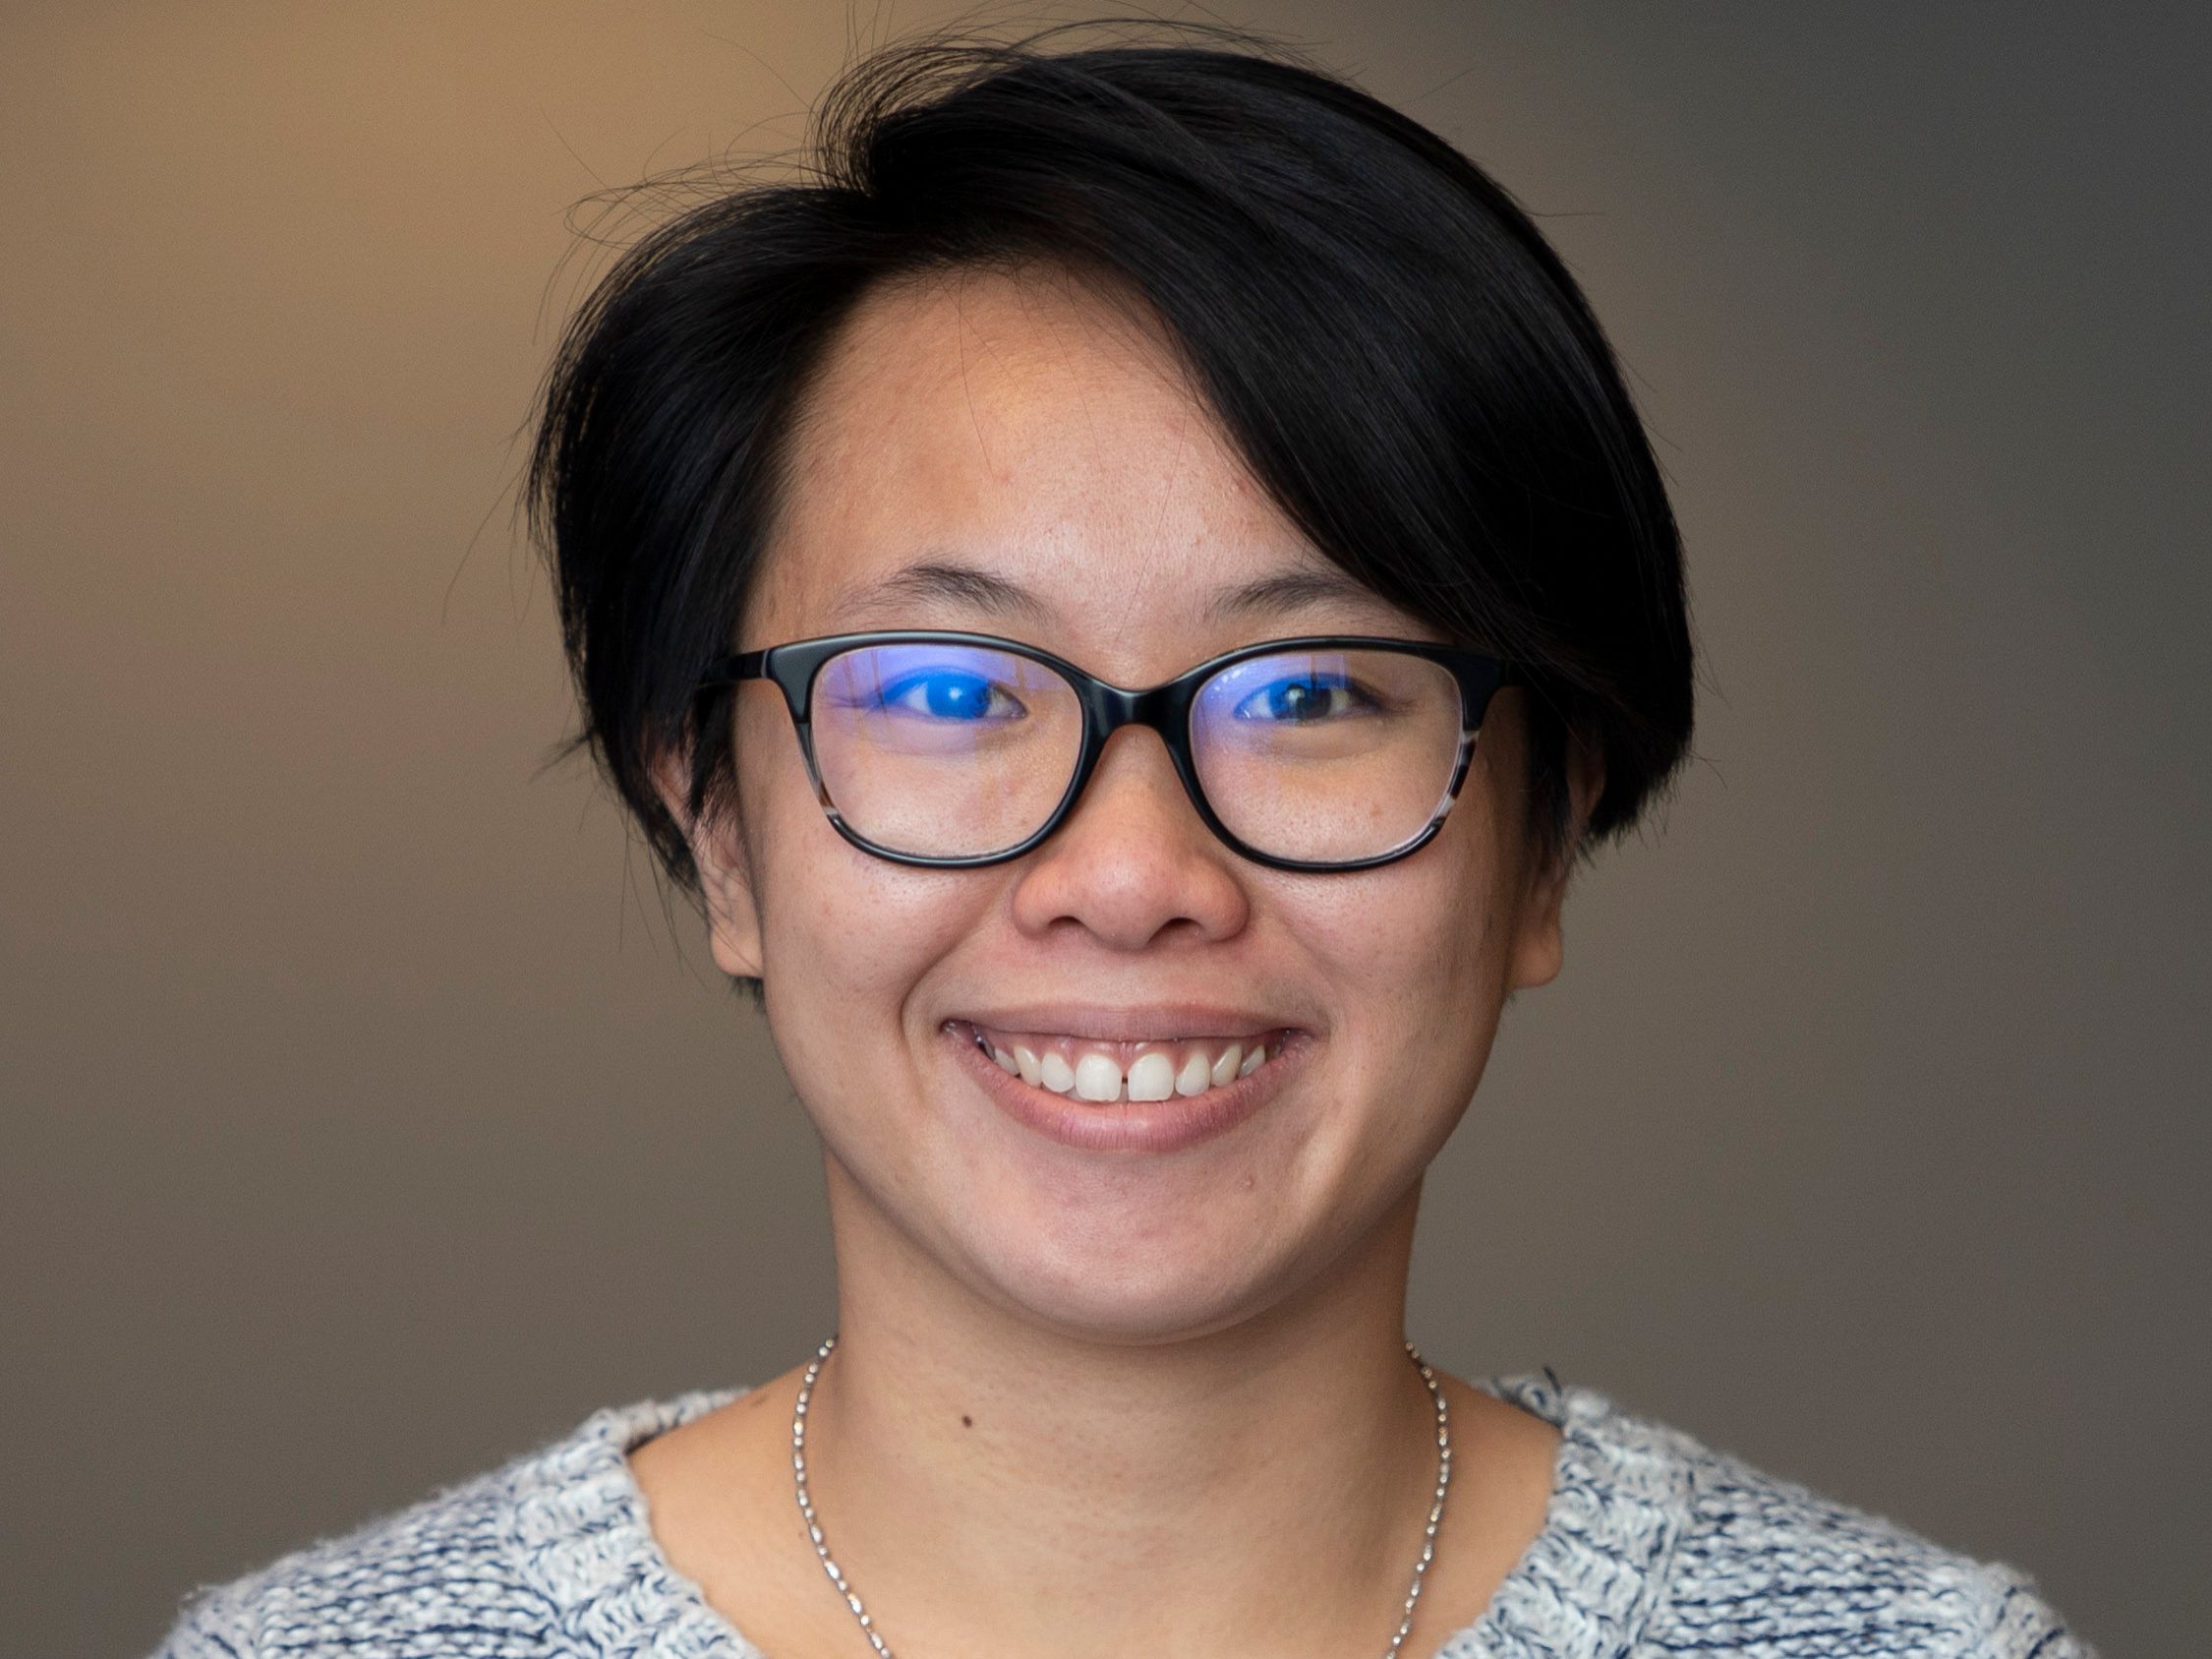 Edwina Wong hopes to evaluate commonly used workplace diversity and inclusion initiatives.